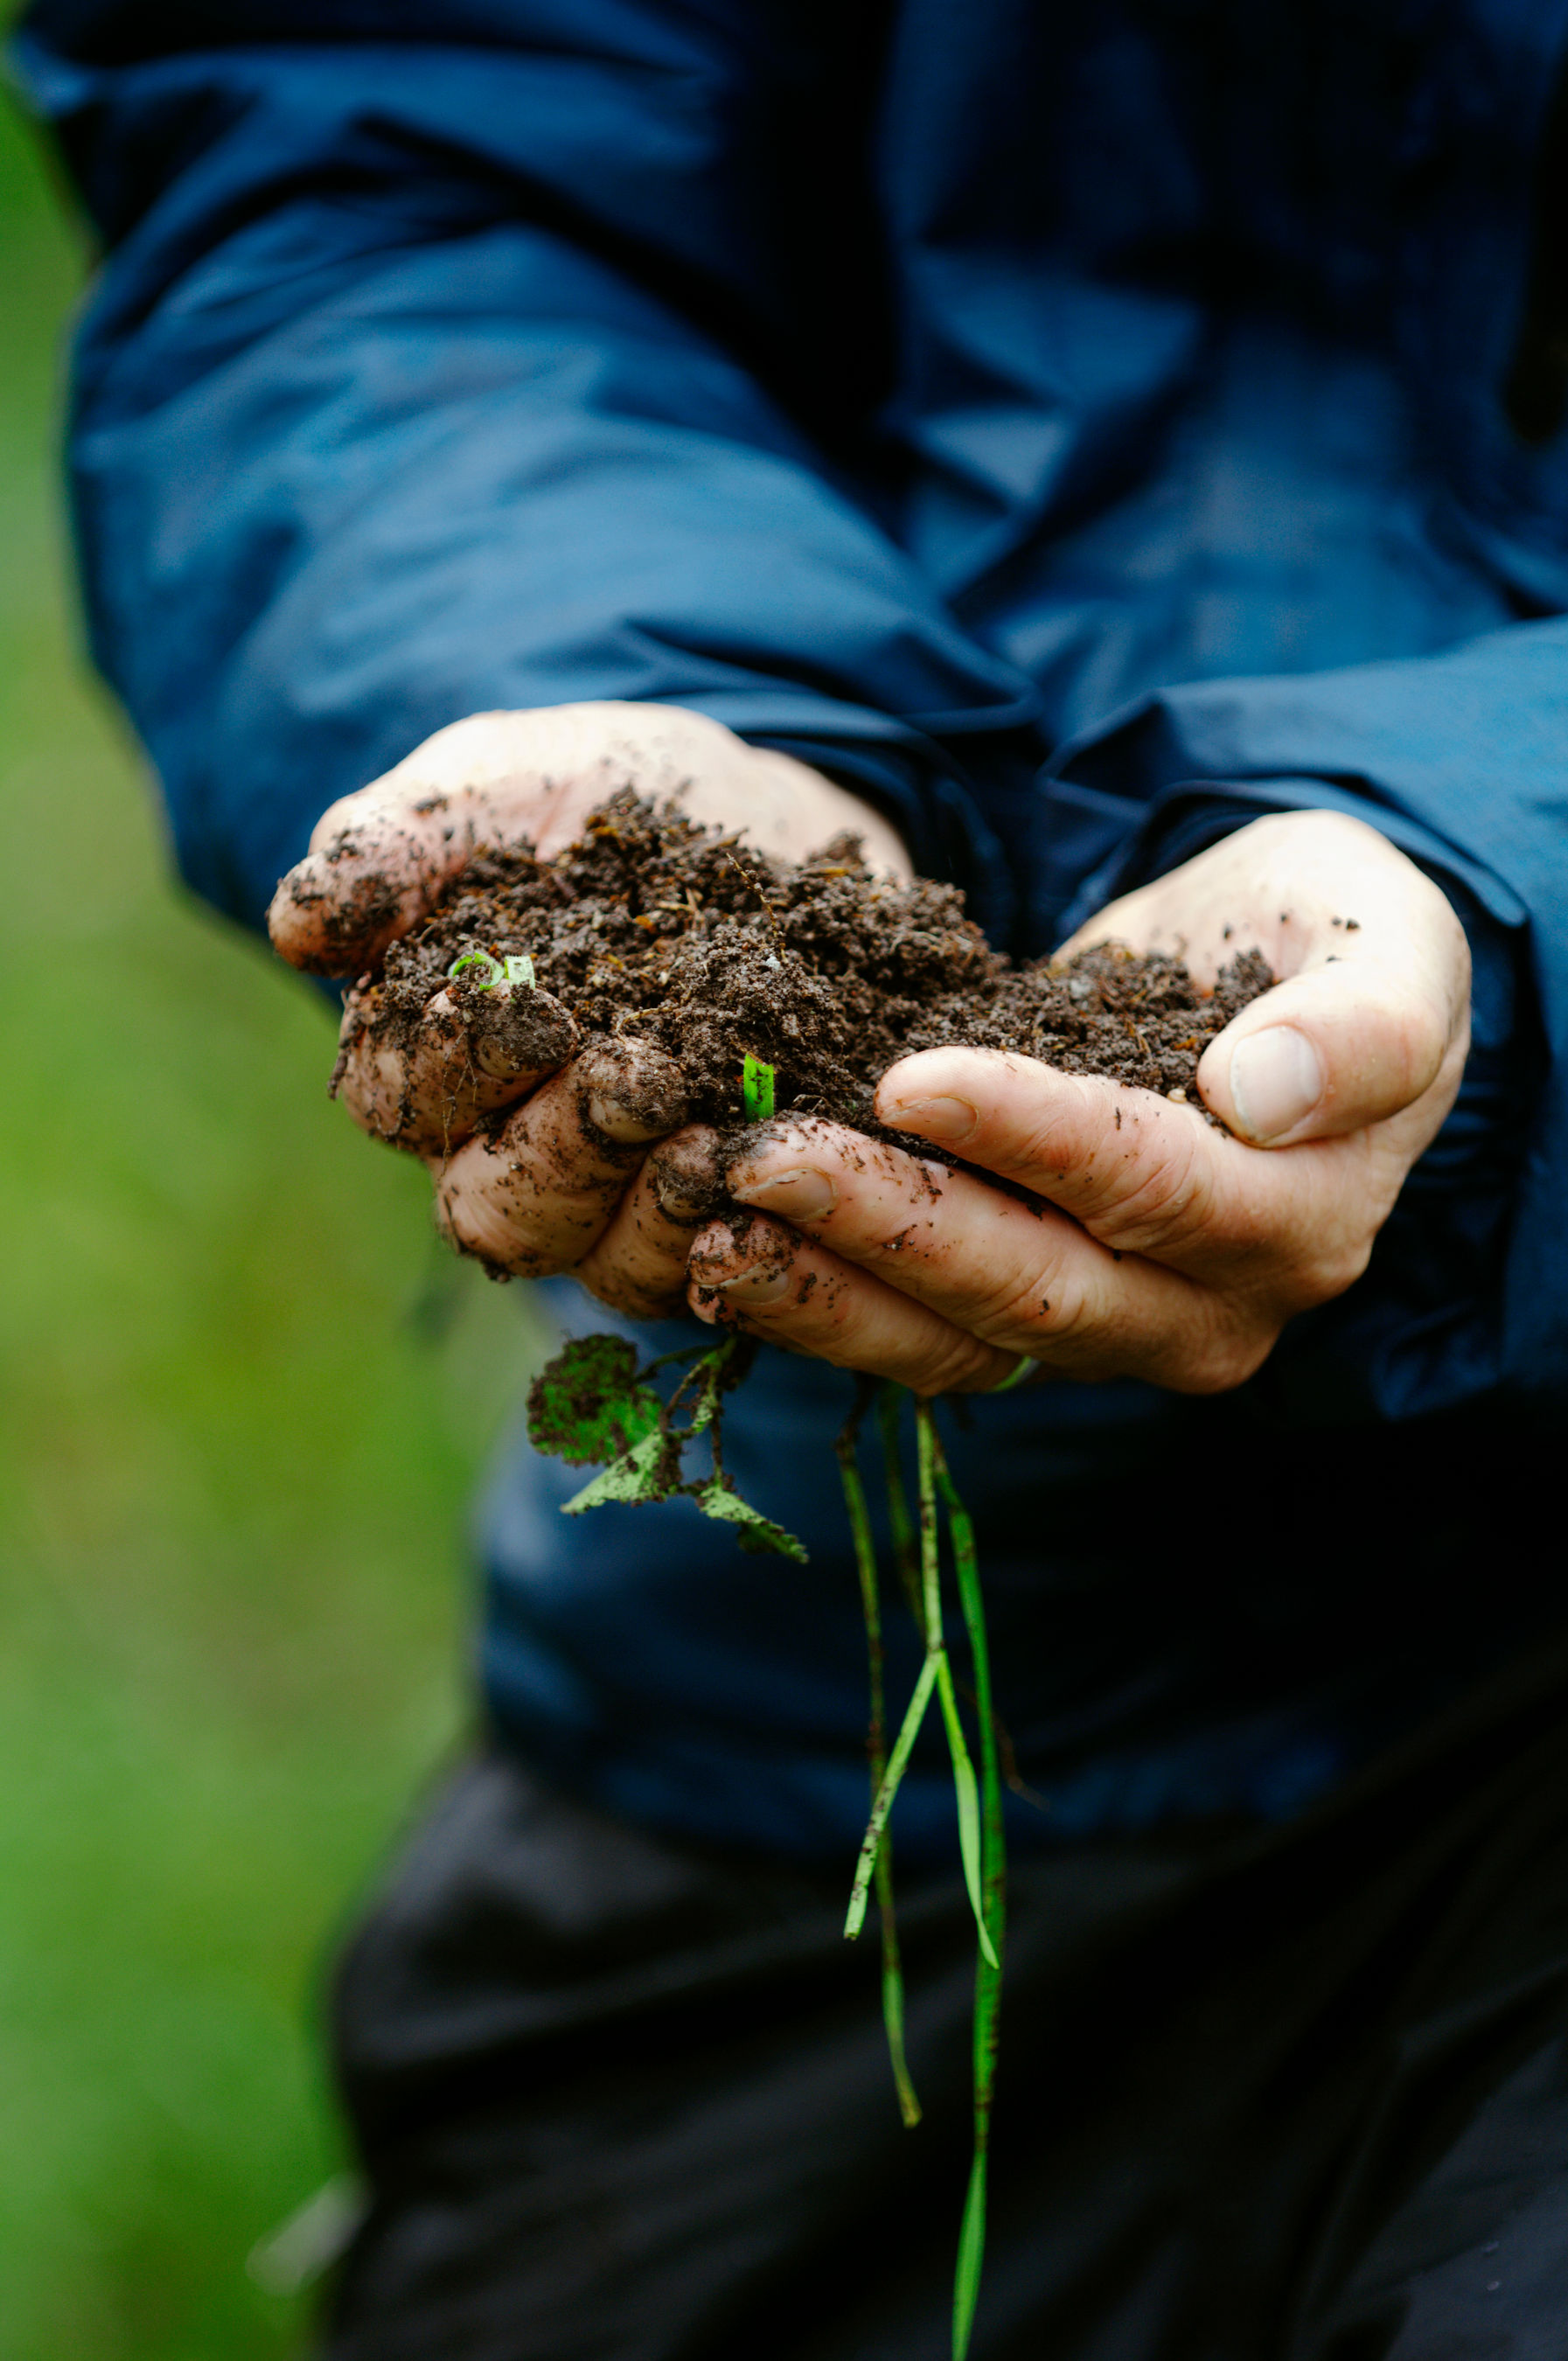 The changes we make at the roots of our supply chain will deliver the greatest impact – by reducing emissions, improving water quality, sequestering carbon, and building up the resilience of our soils for the next generation